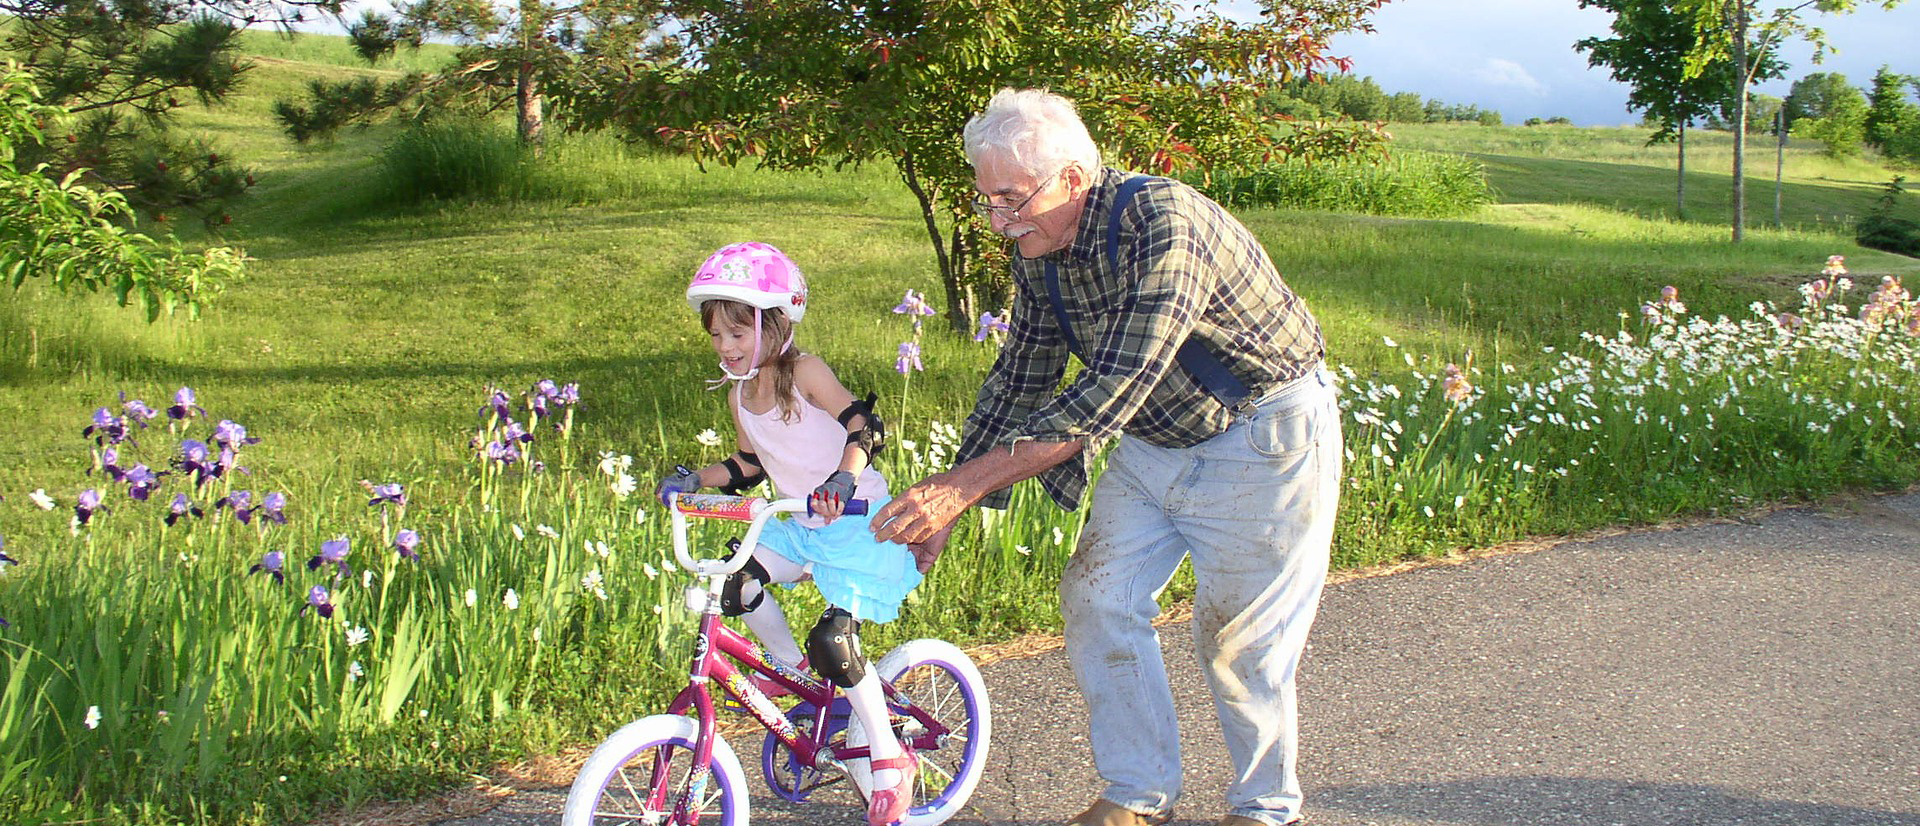 Grandfather with granddaughter riding bicycle Video Biographies